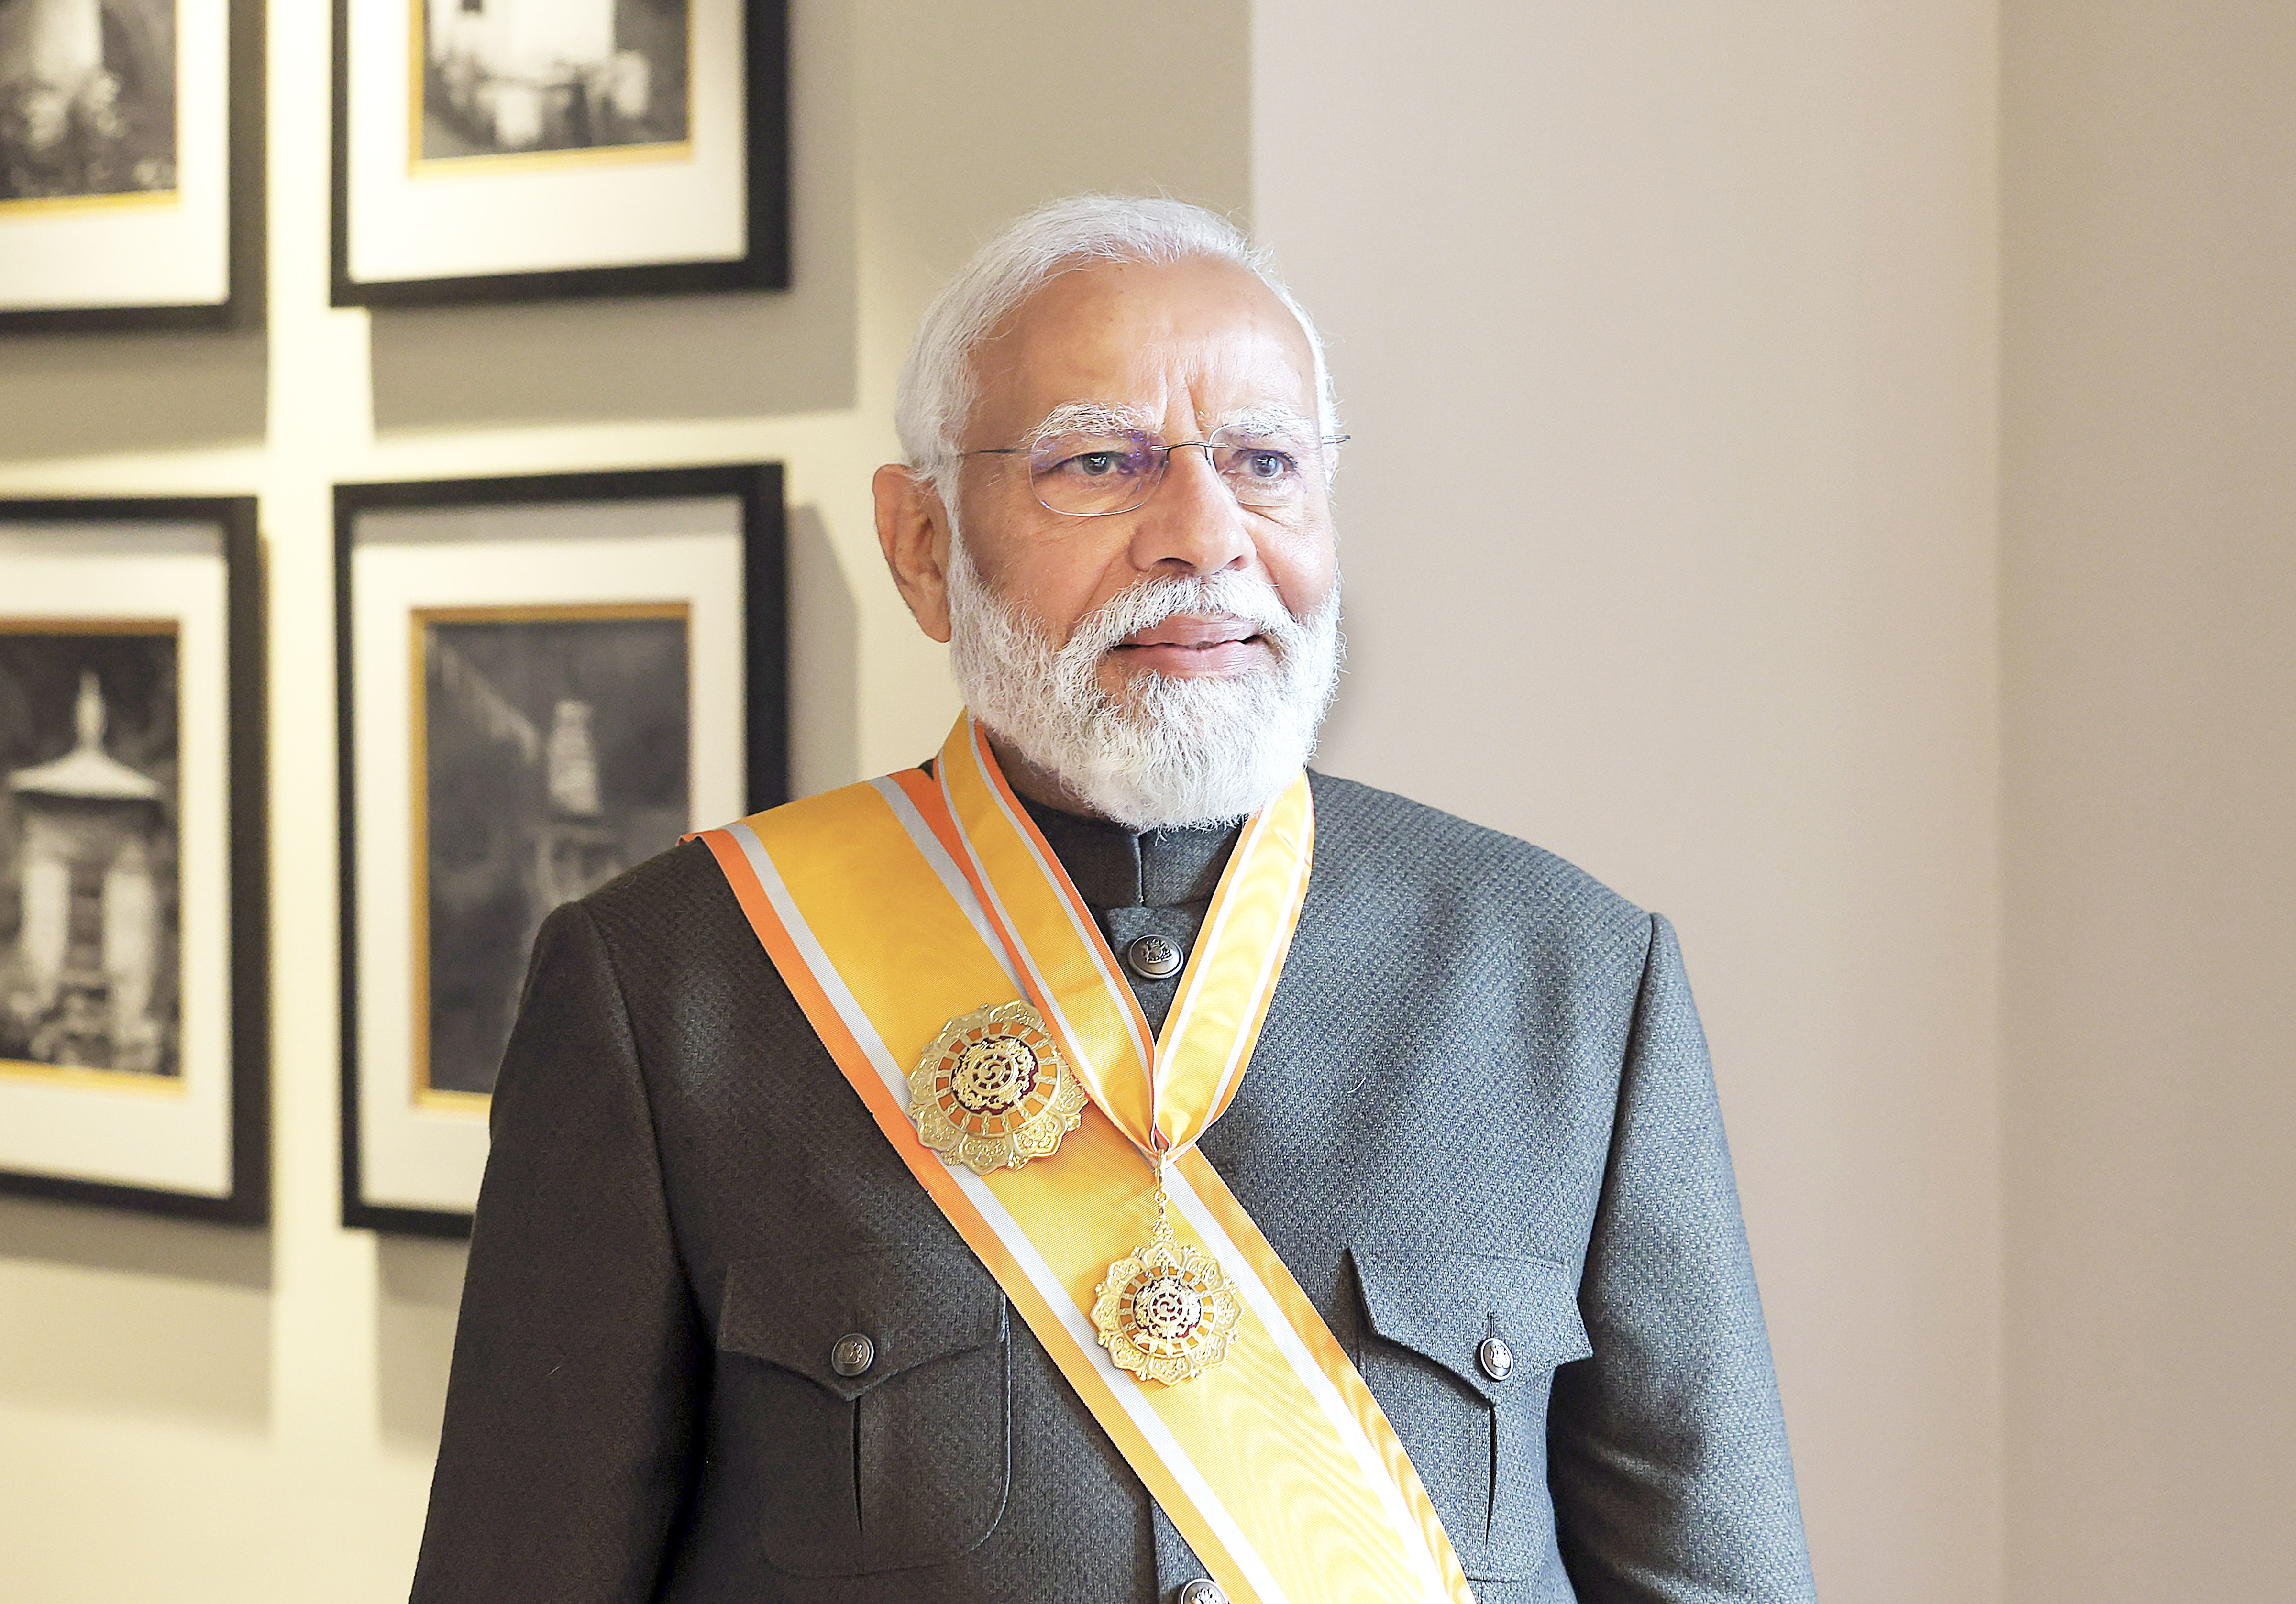 PM Modi after he was conferred with the 'Order of the Druk Gyalpo'.